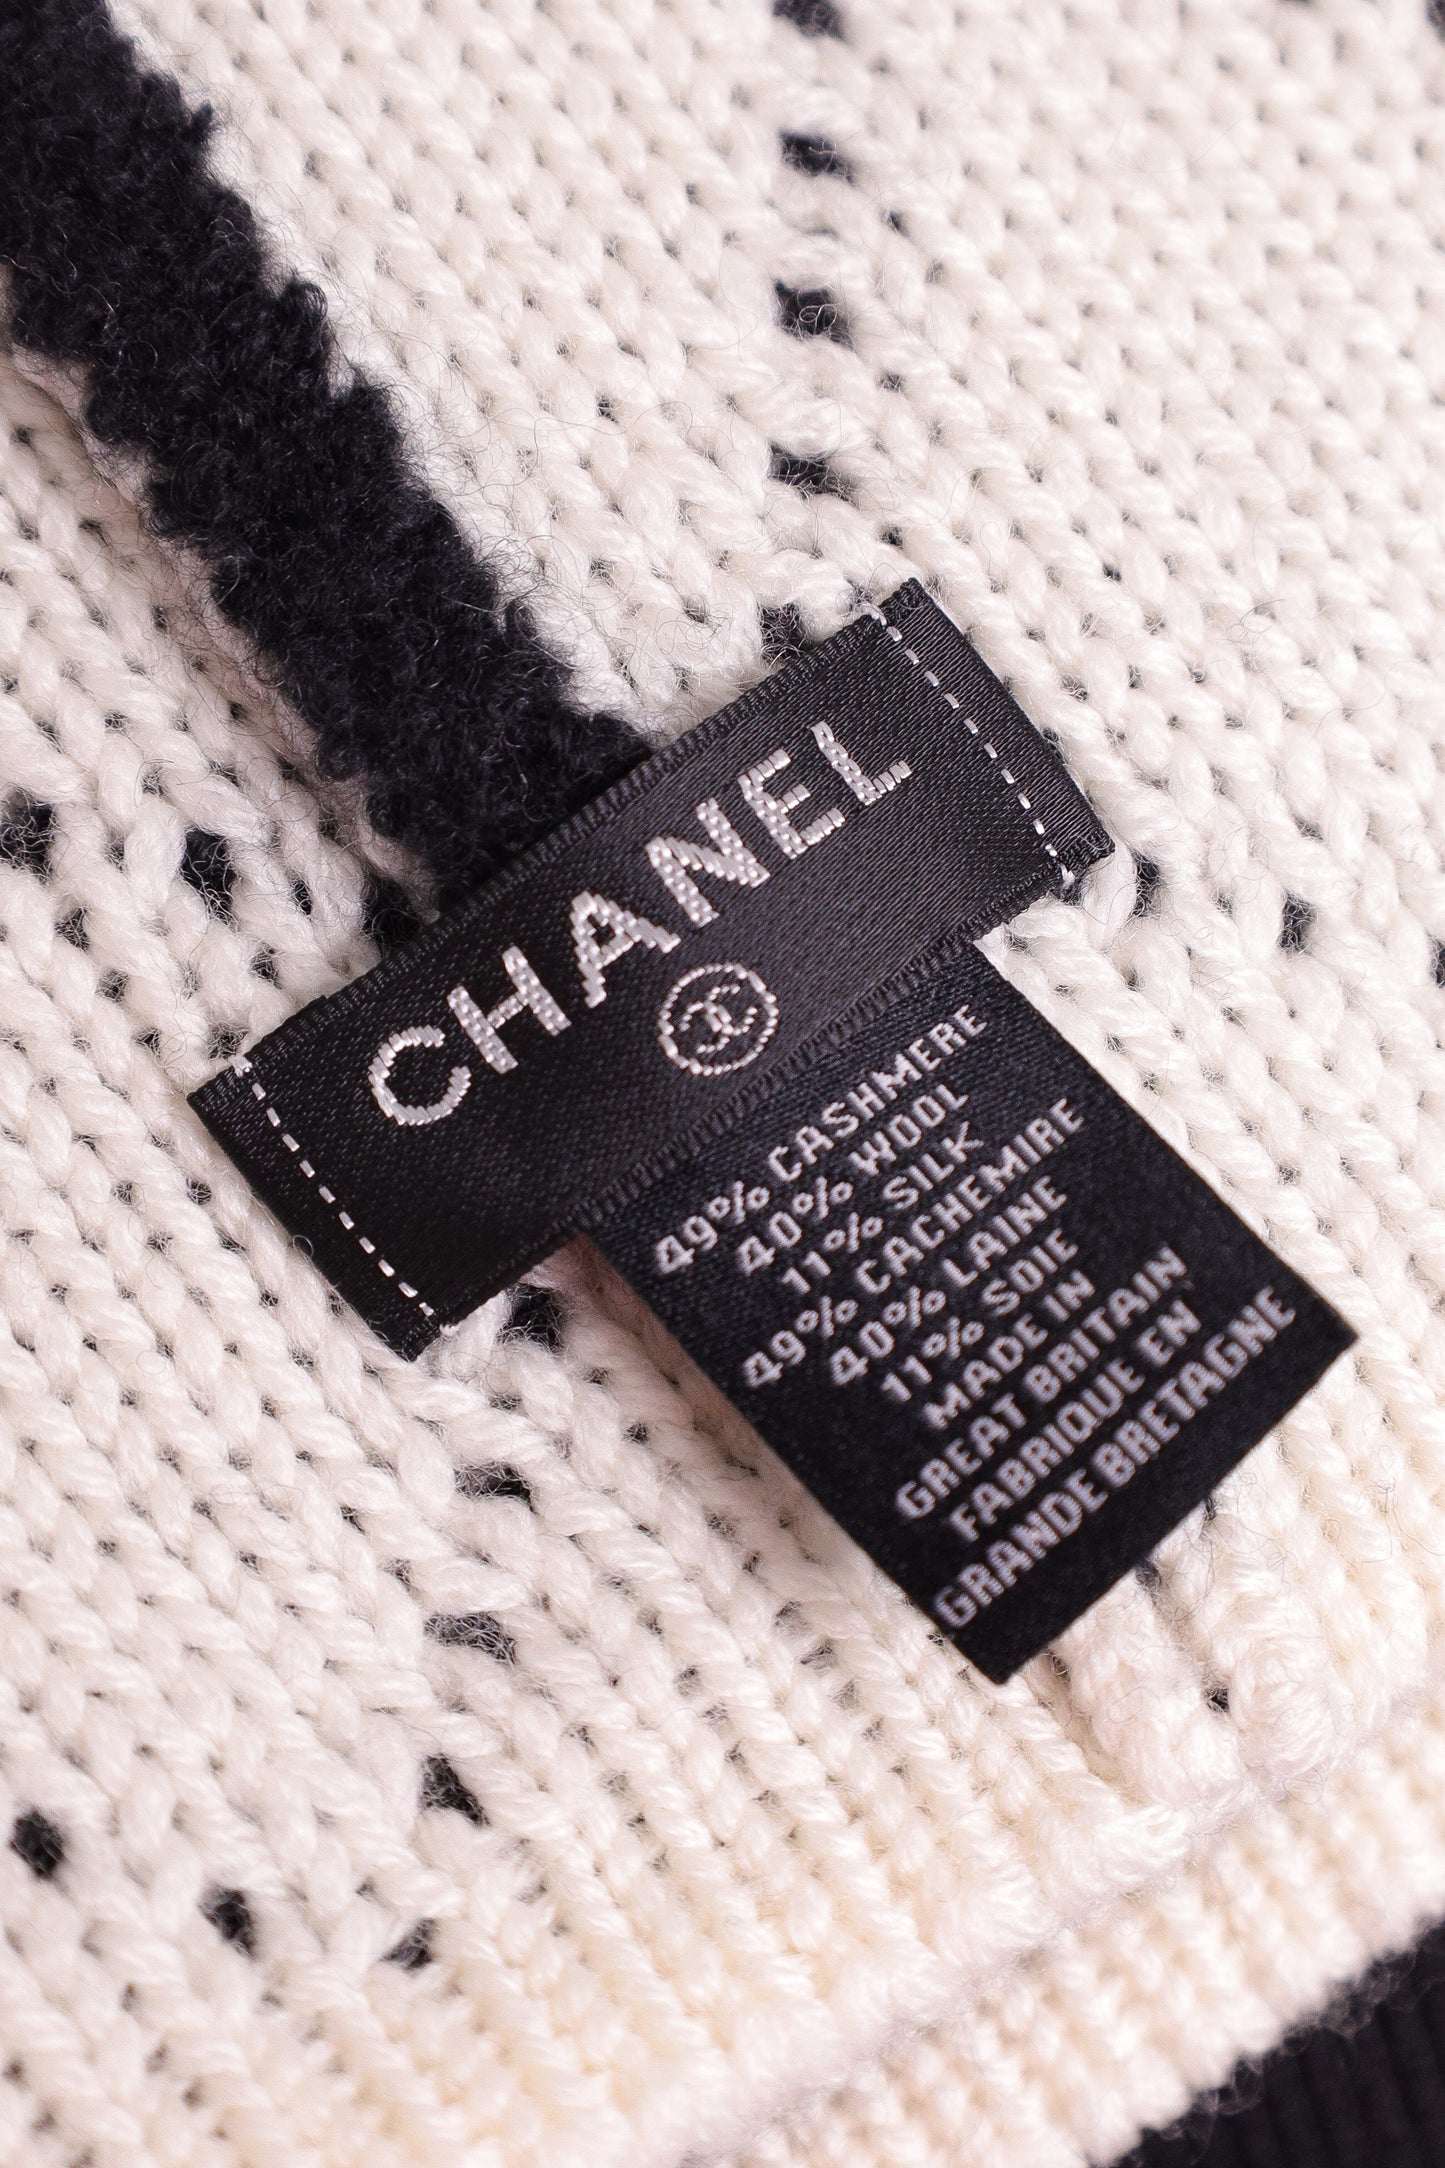 CHANEL hat CC collection 2021 - NEW - AA7767 B06531 Cashmere wool